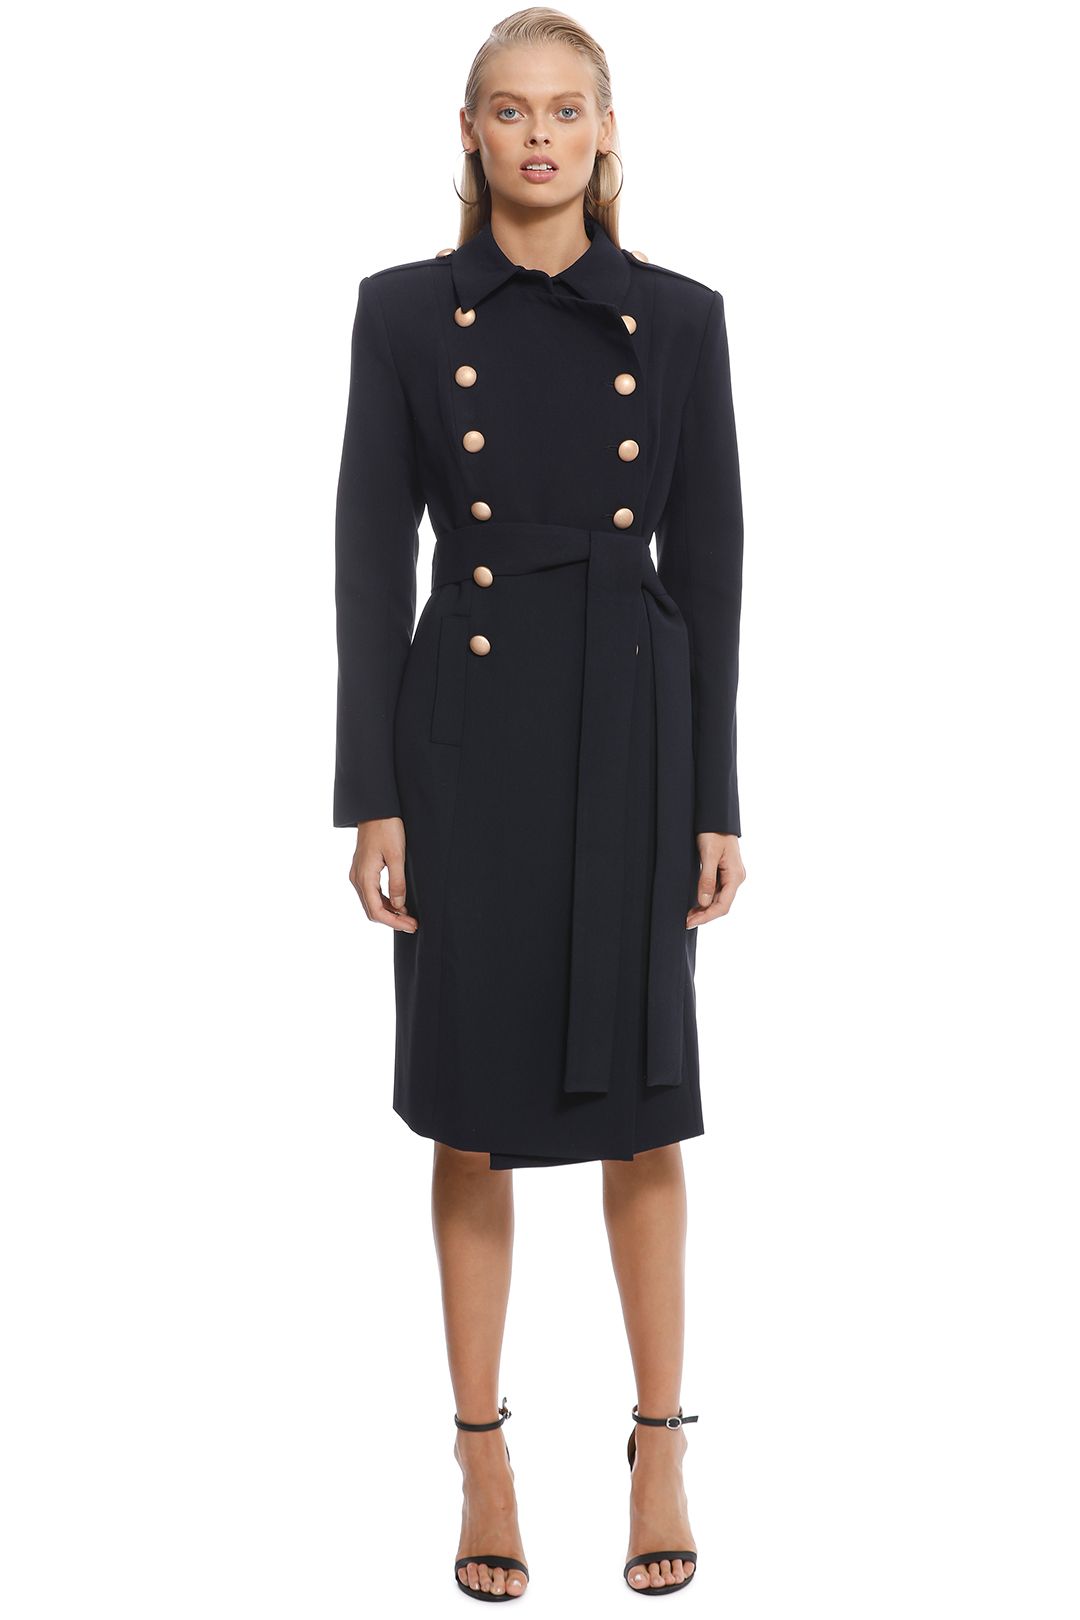 Misha Collection - Andrea Coat  Navy - Front